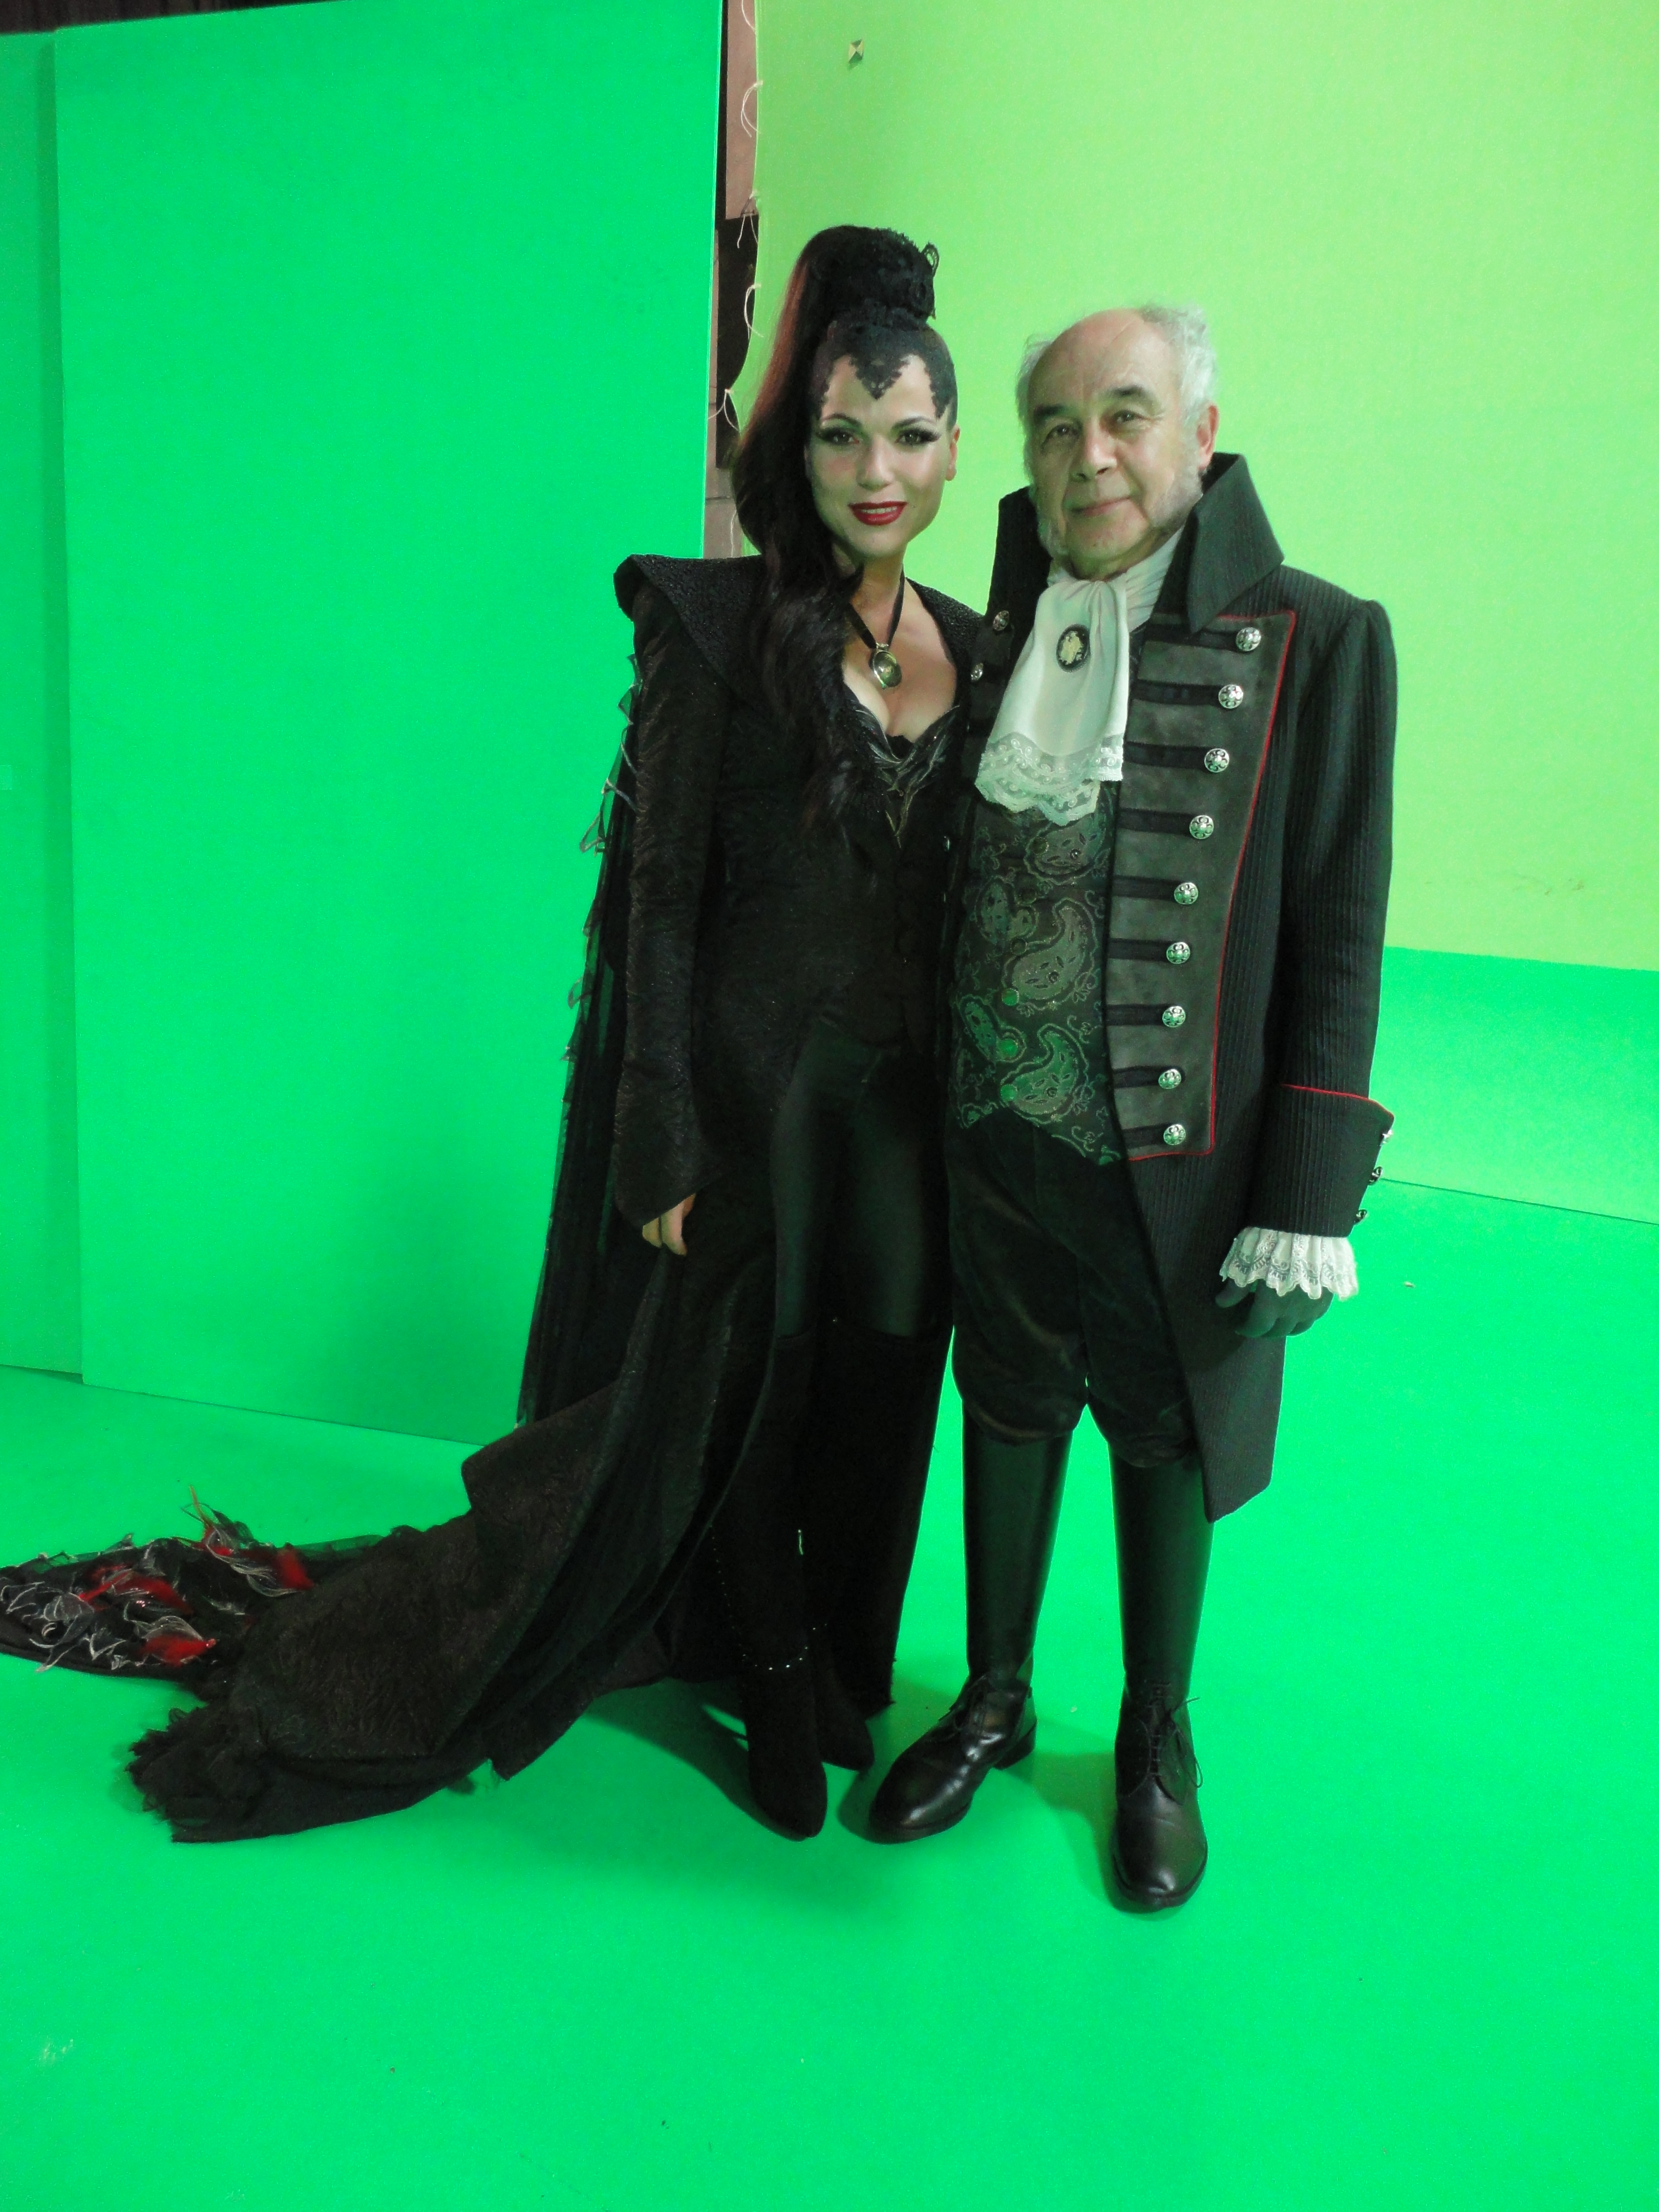 Lana Parrilla, the evil Queen and Tony Perez the Vallet in Once Upon A Time